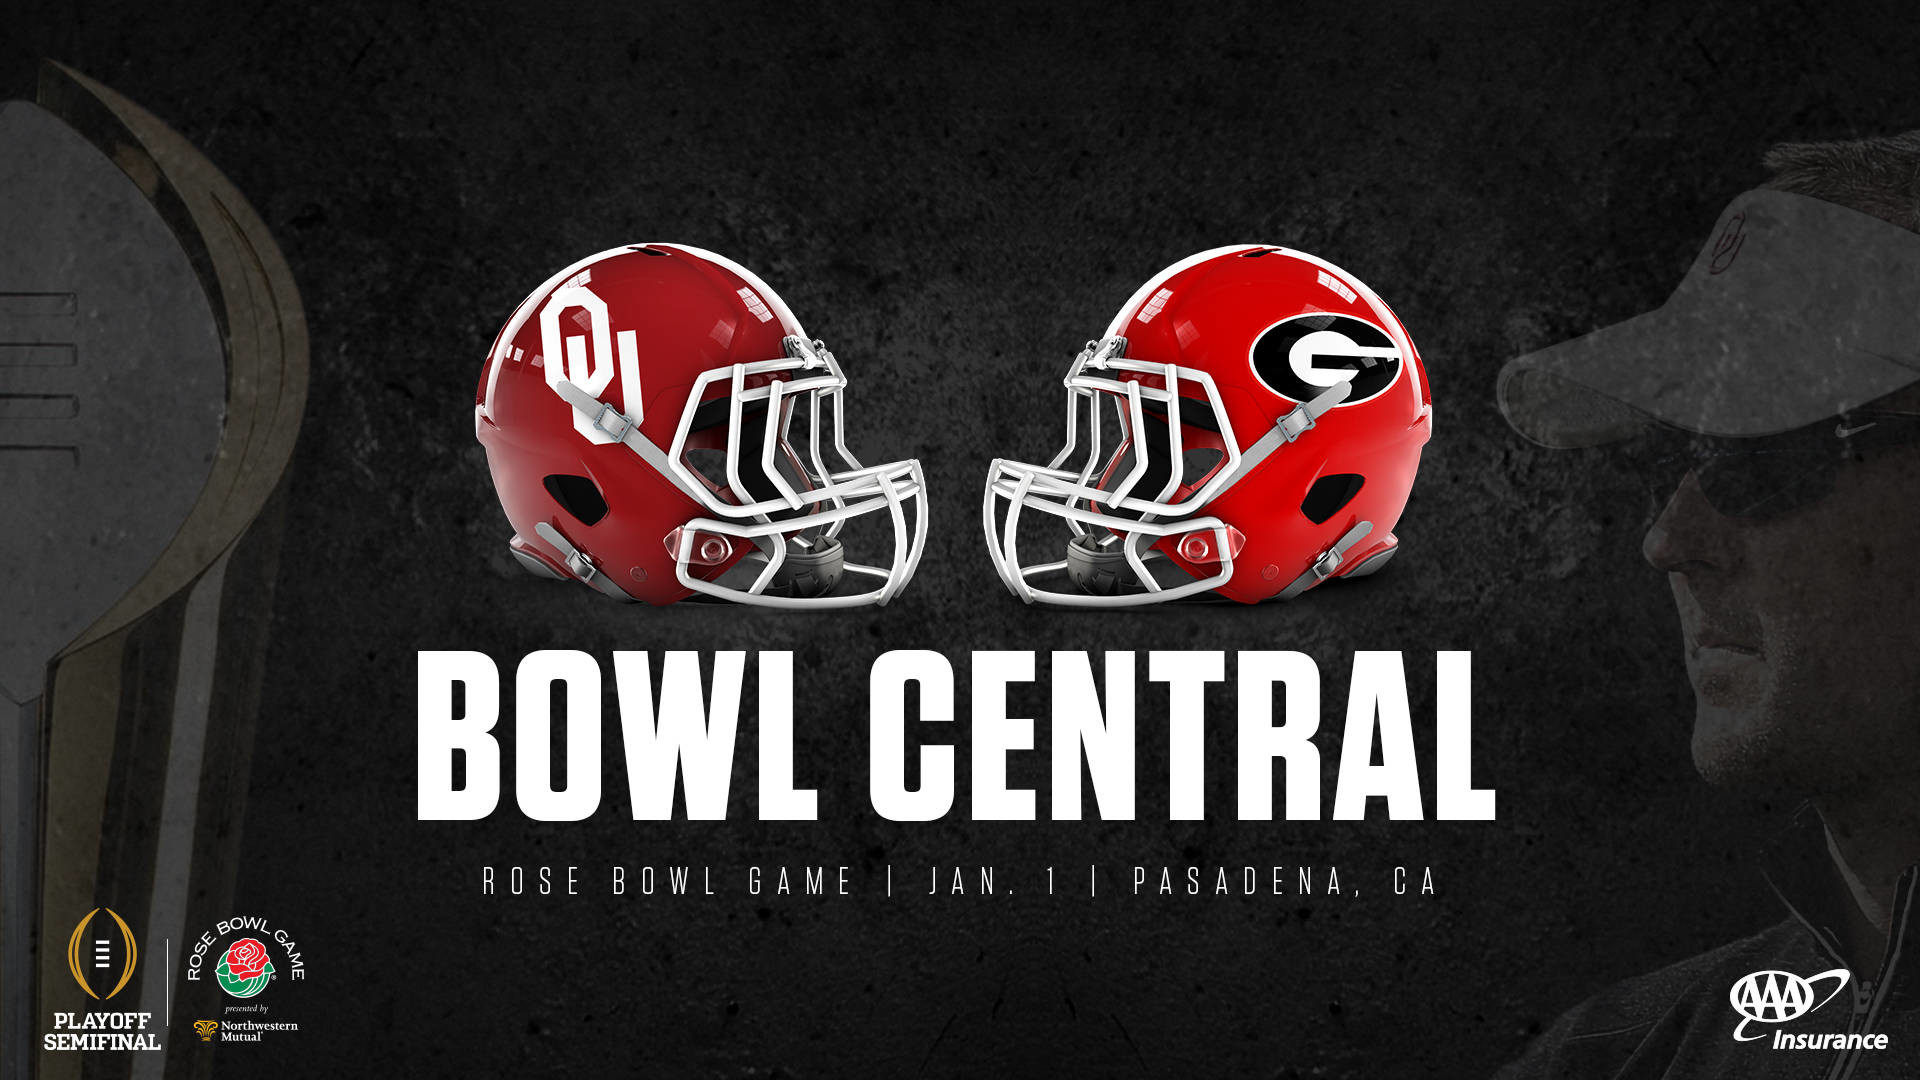 1920x1080 Bowl Central presented by AAA Insurance